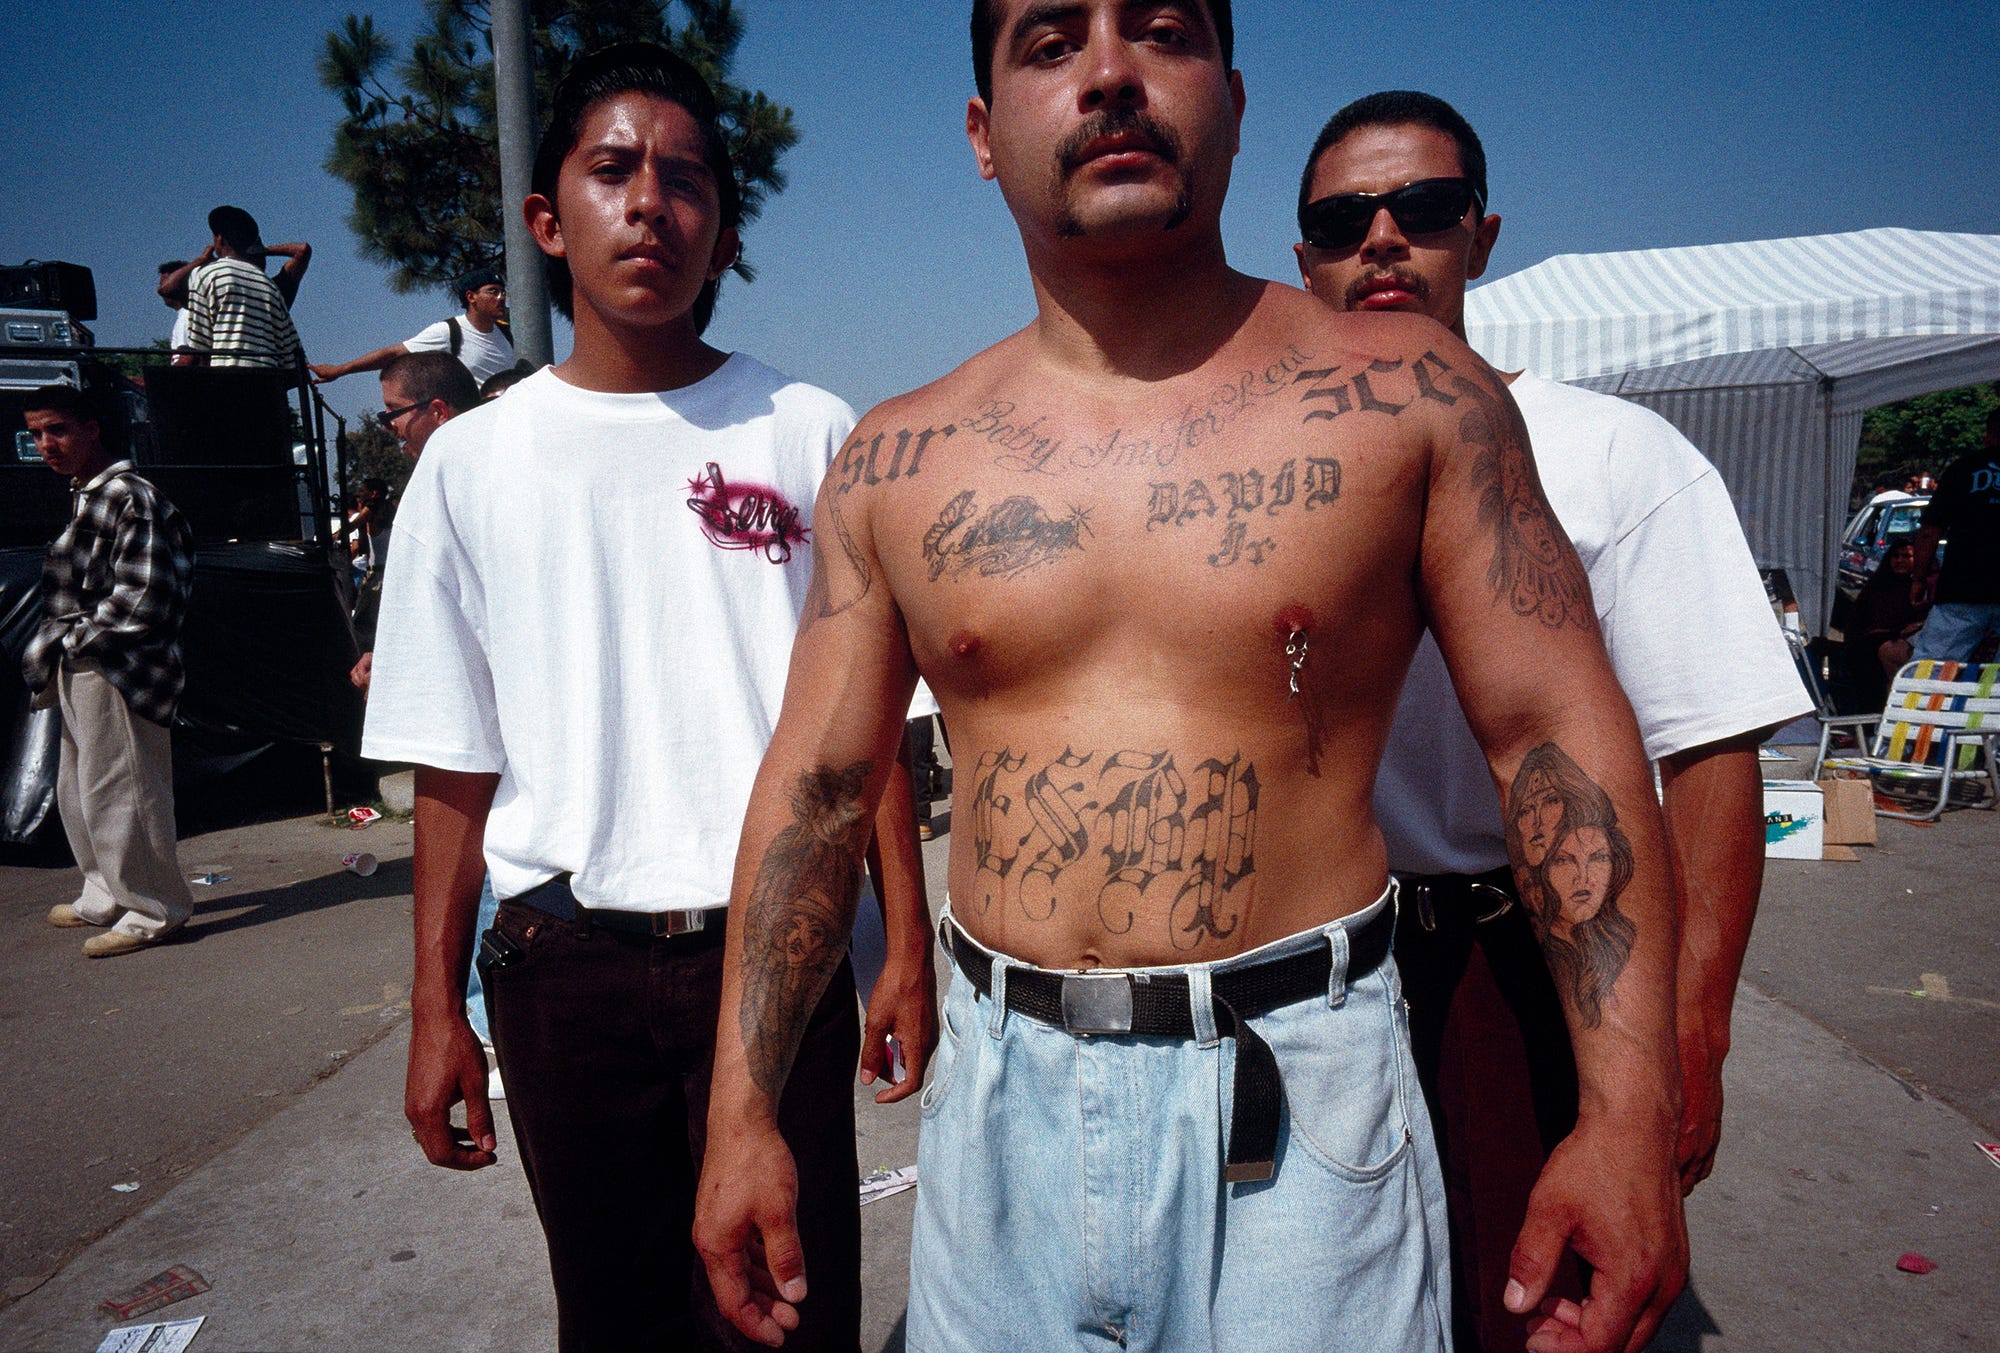 Photos The Vida Loca Of East La Teen Gang Culture In The 90s By Rian Dundon Timeline